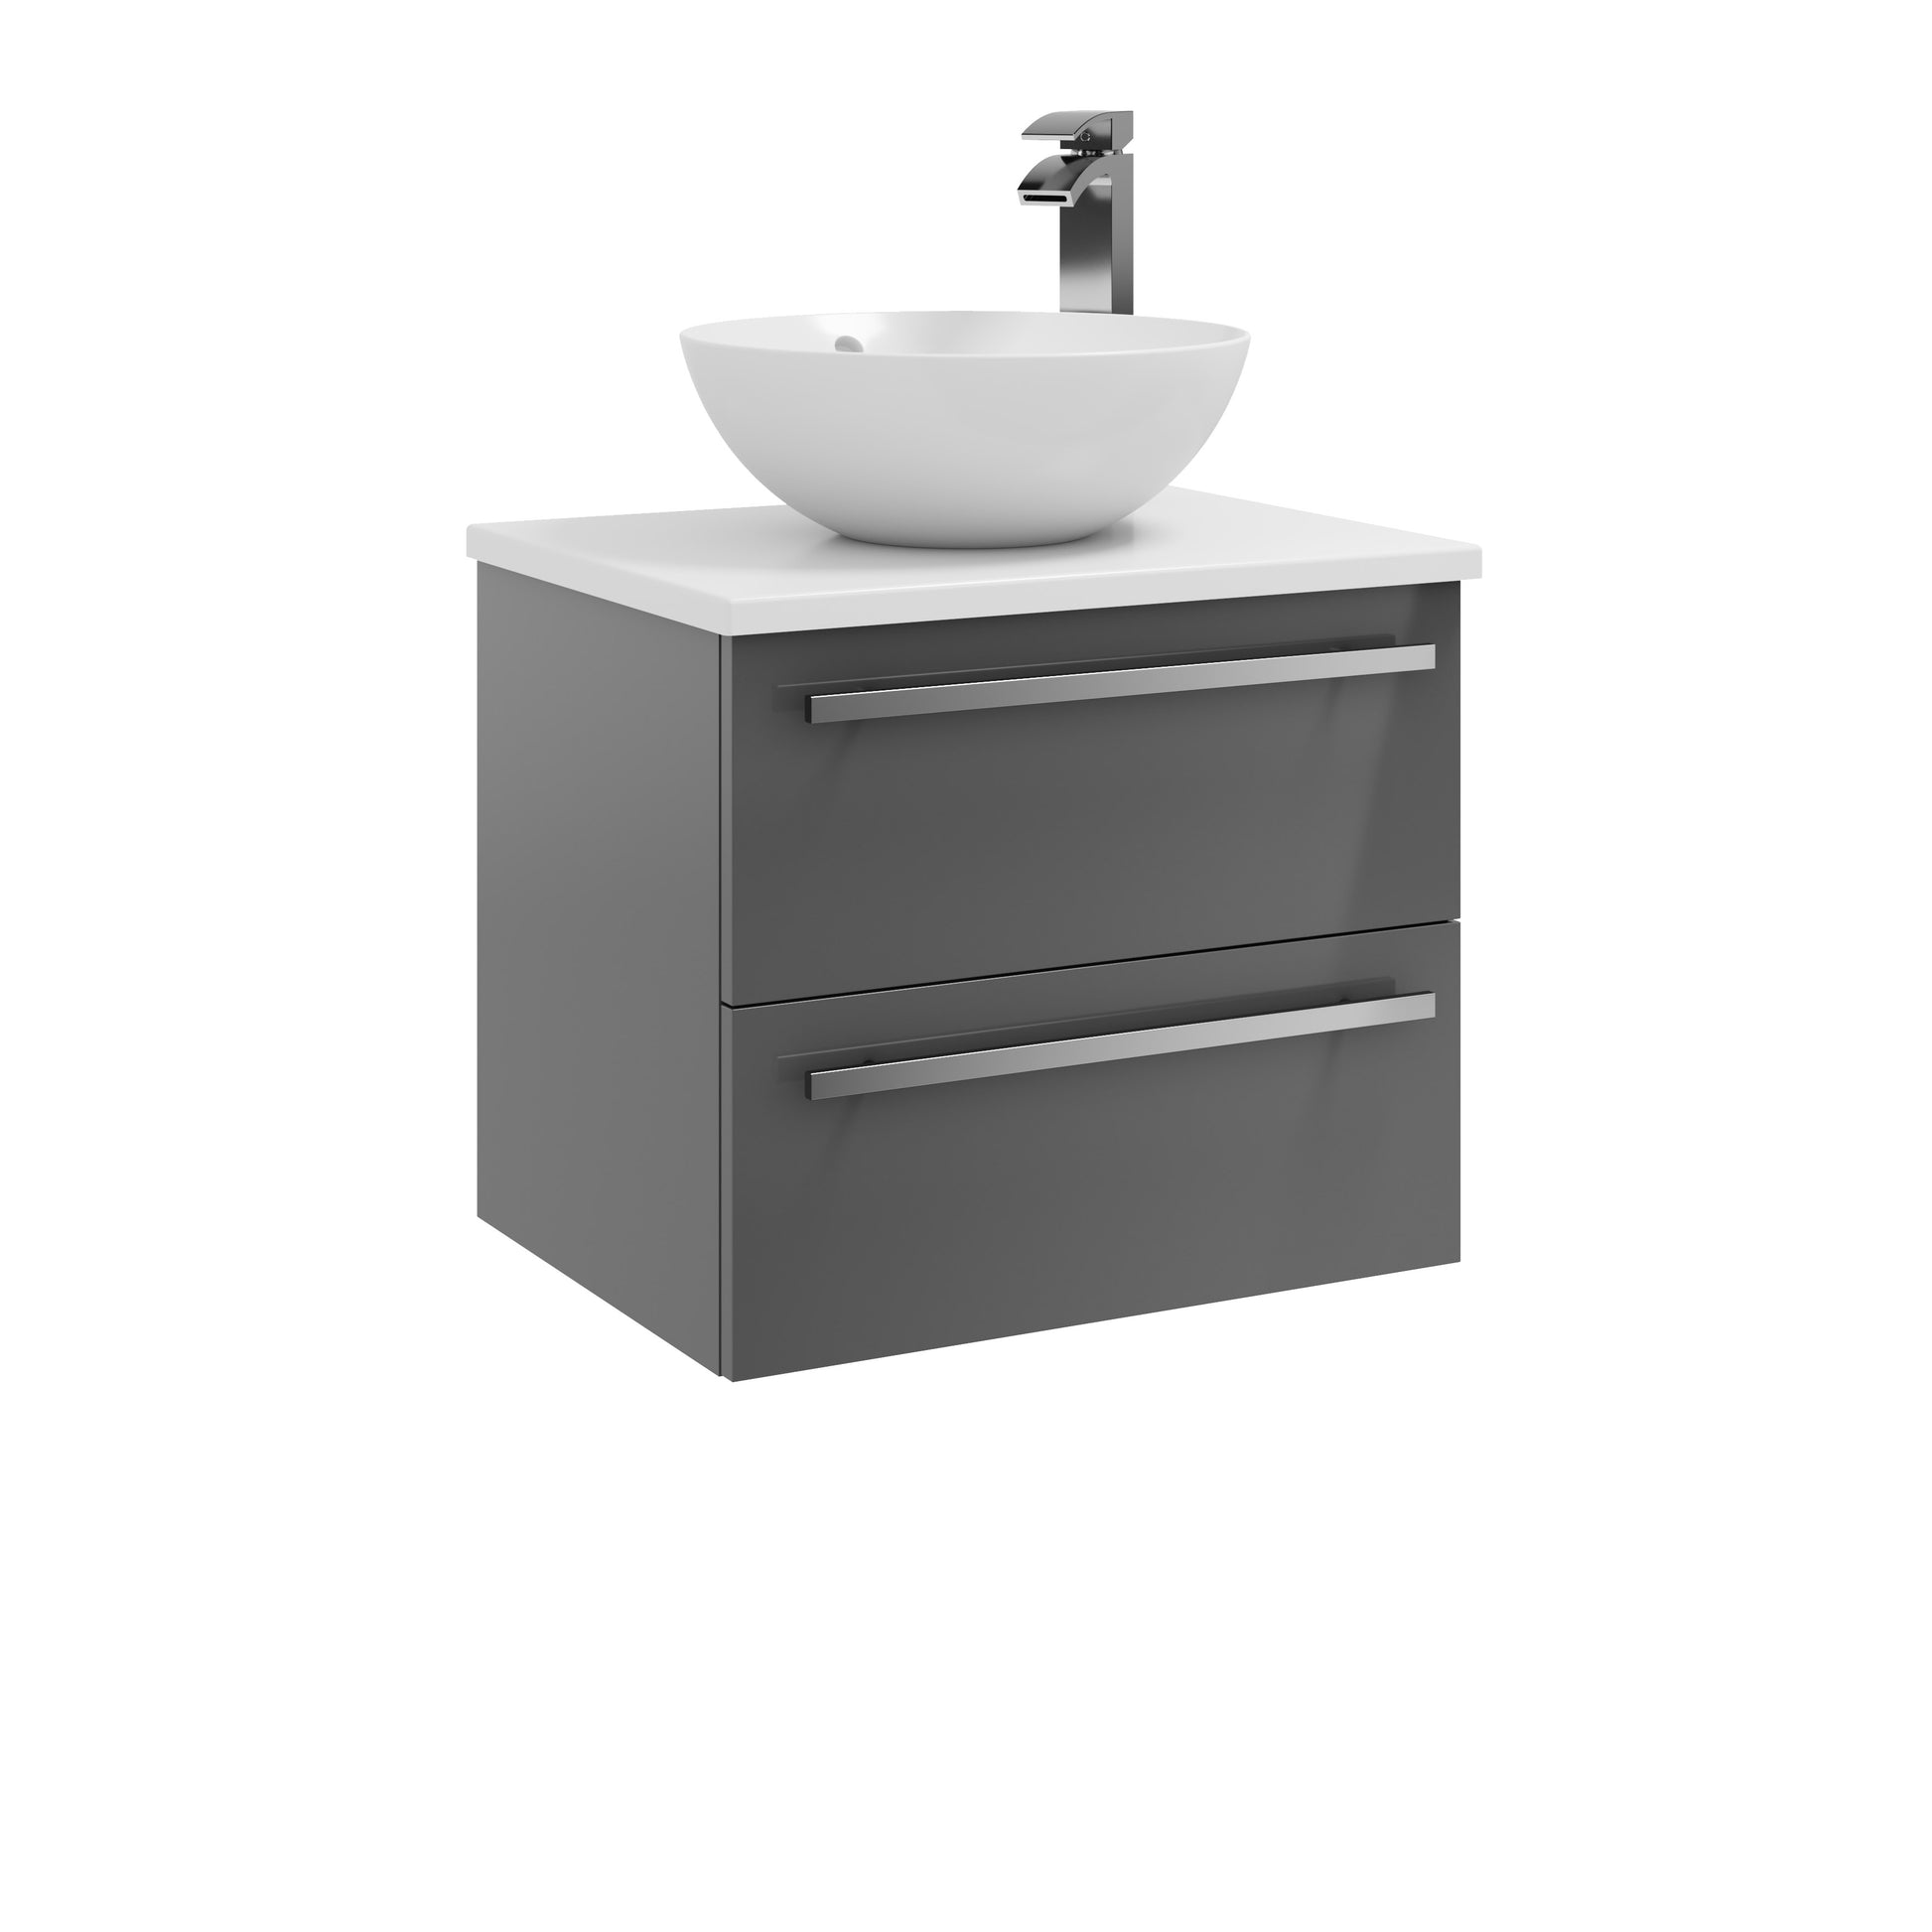 Purity 2 Drawer Unit, Ceramic Worktop & Sit on Bowl - Wall Mounted / Storm Grey Gloss - Purity - Bliss Bathroom Supplies Ltd -